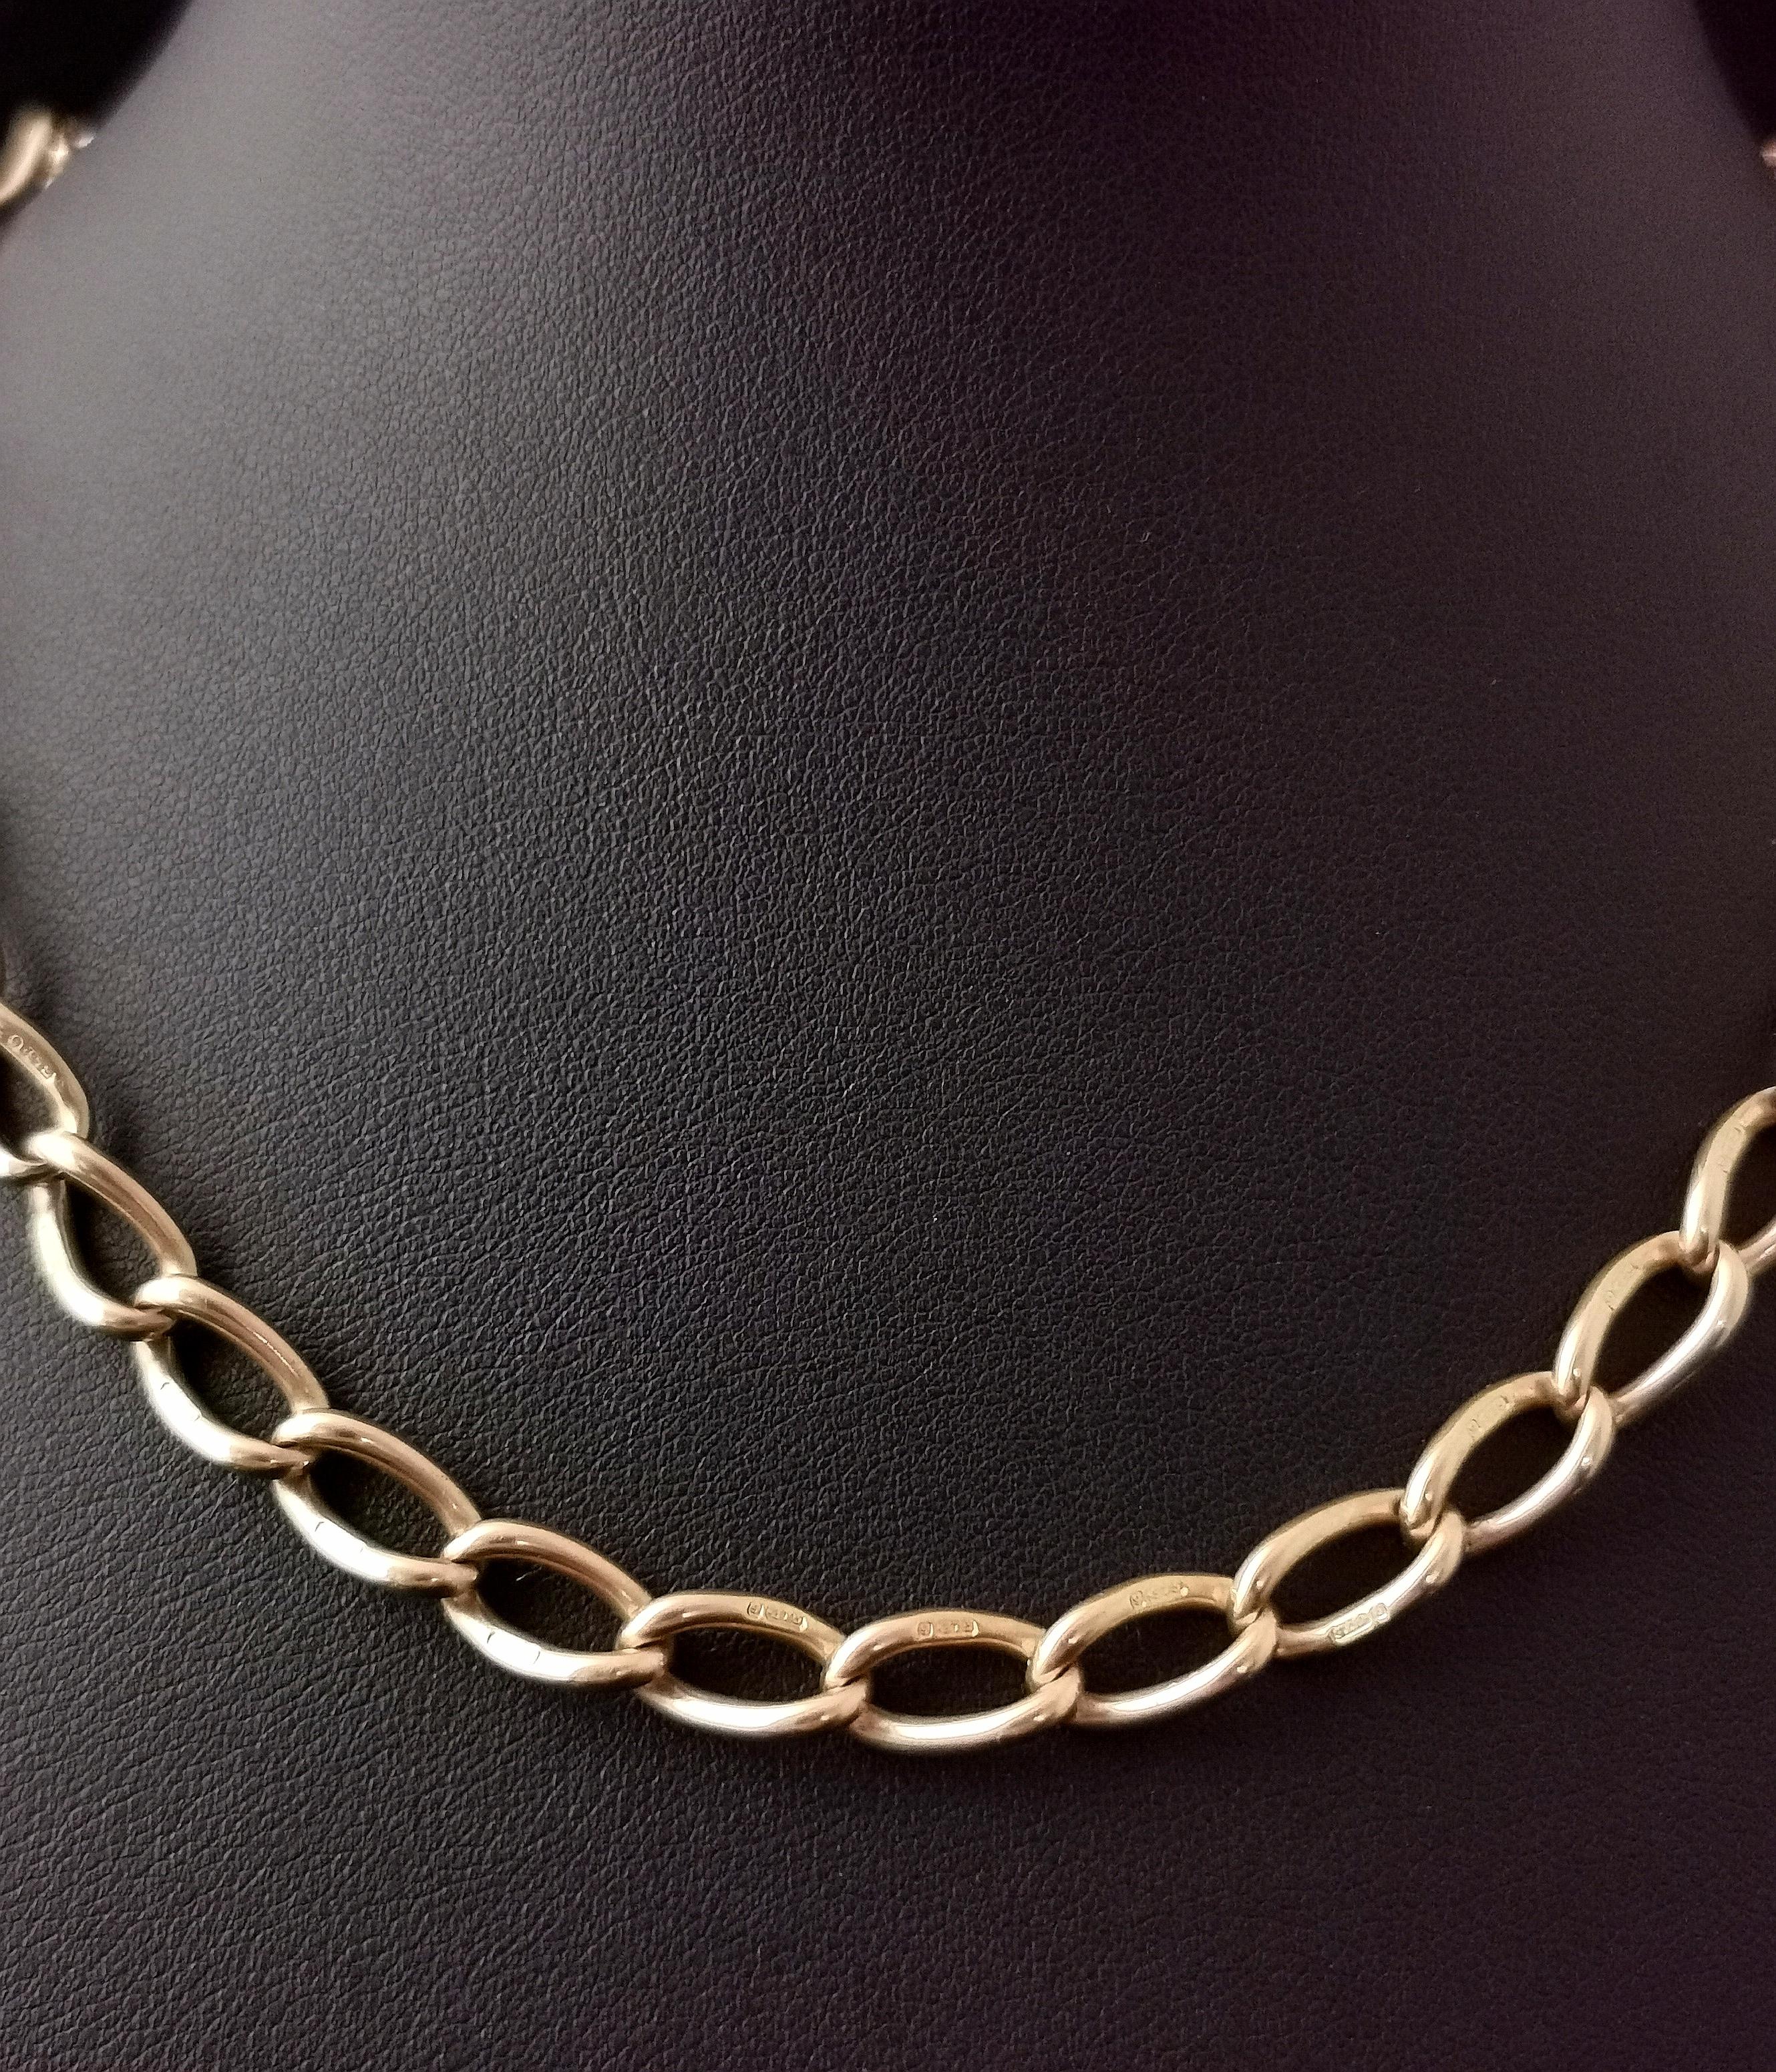 Antique 9k Gold Curb Link Albert Chain, Watch Chain Necklace Victorian 5